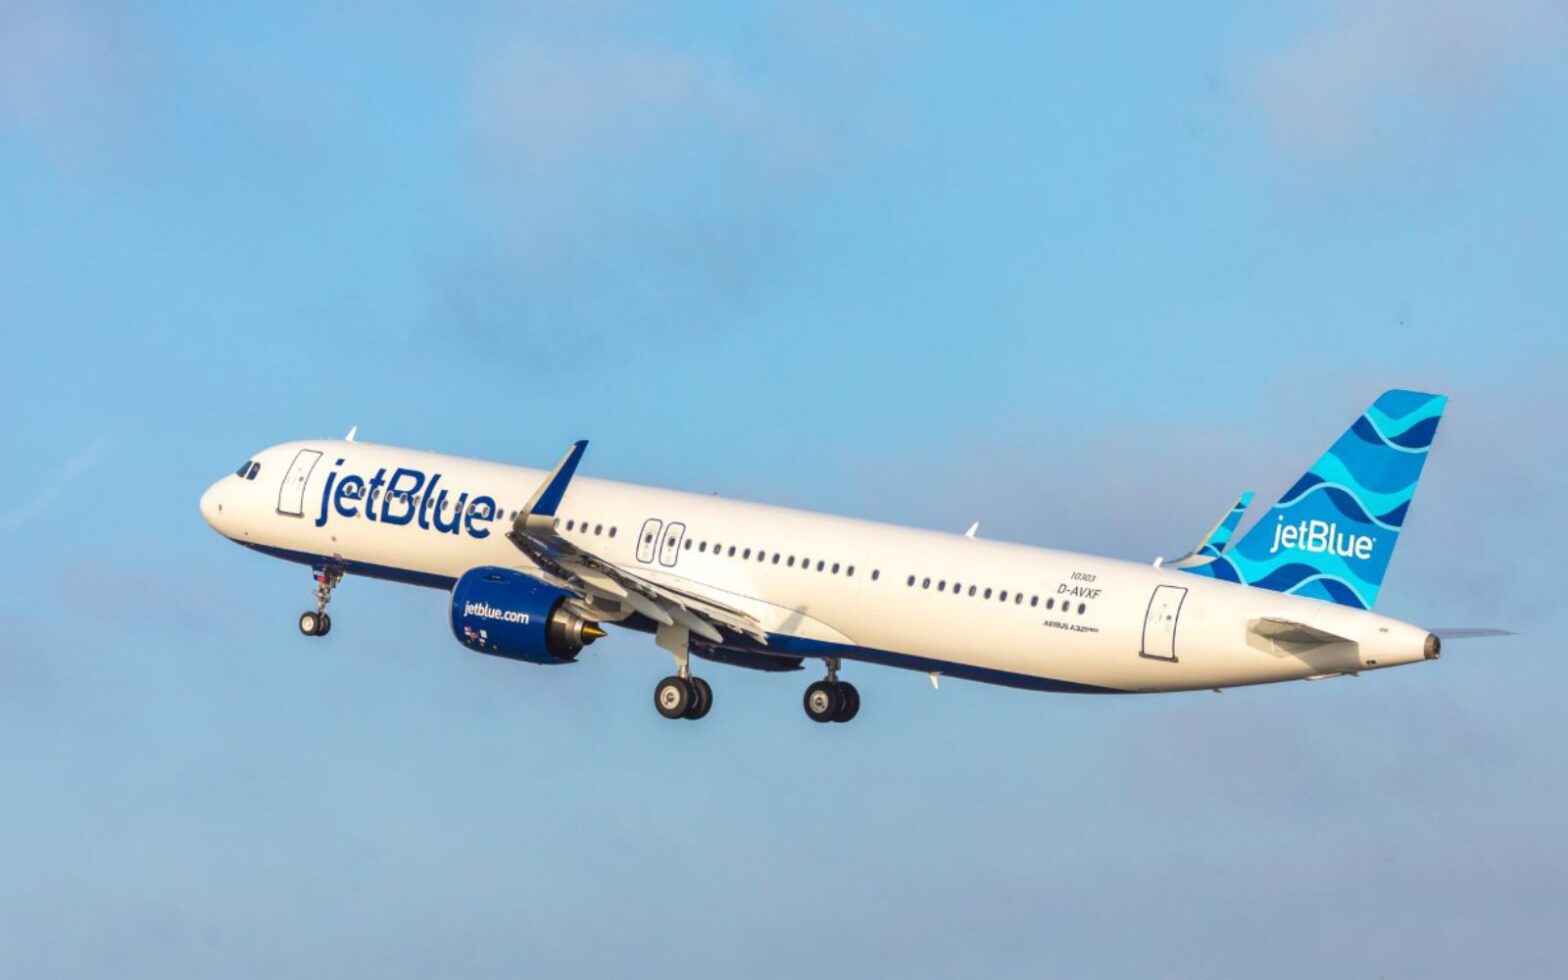 JetBlue Is Adding More Flights To Europe This Summer